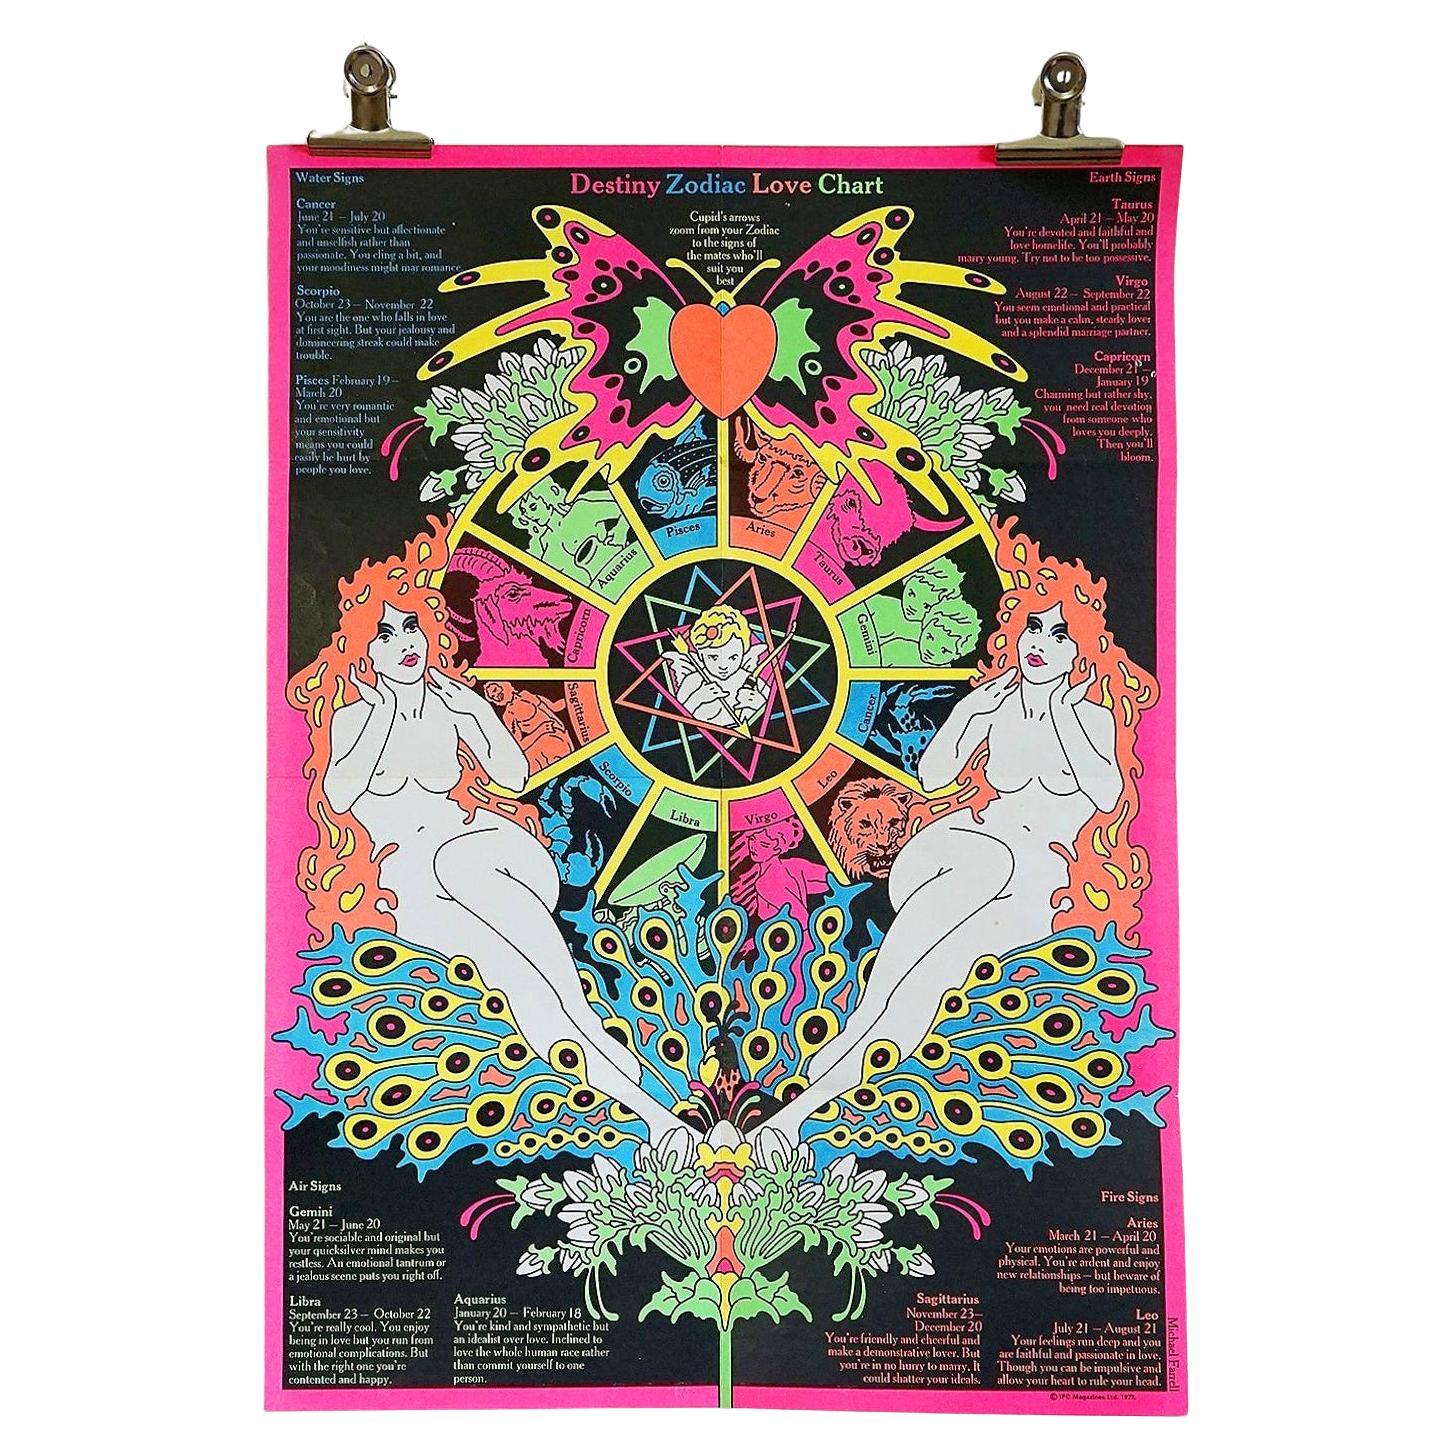 Vintage Psychedelic 'Destiny Zodiac Love Chart' Poster by Michael Farrell, 1970s For Sale